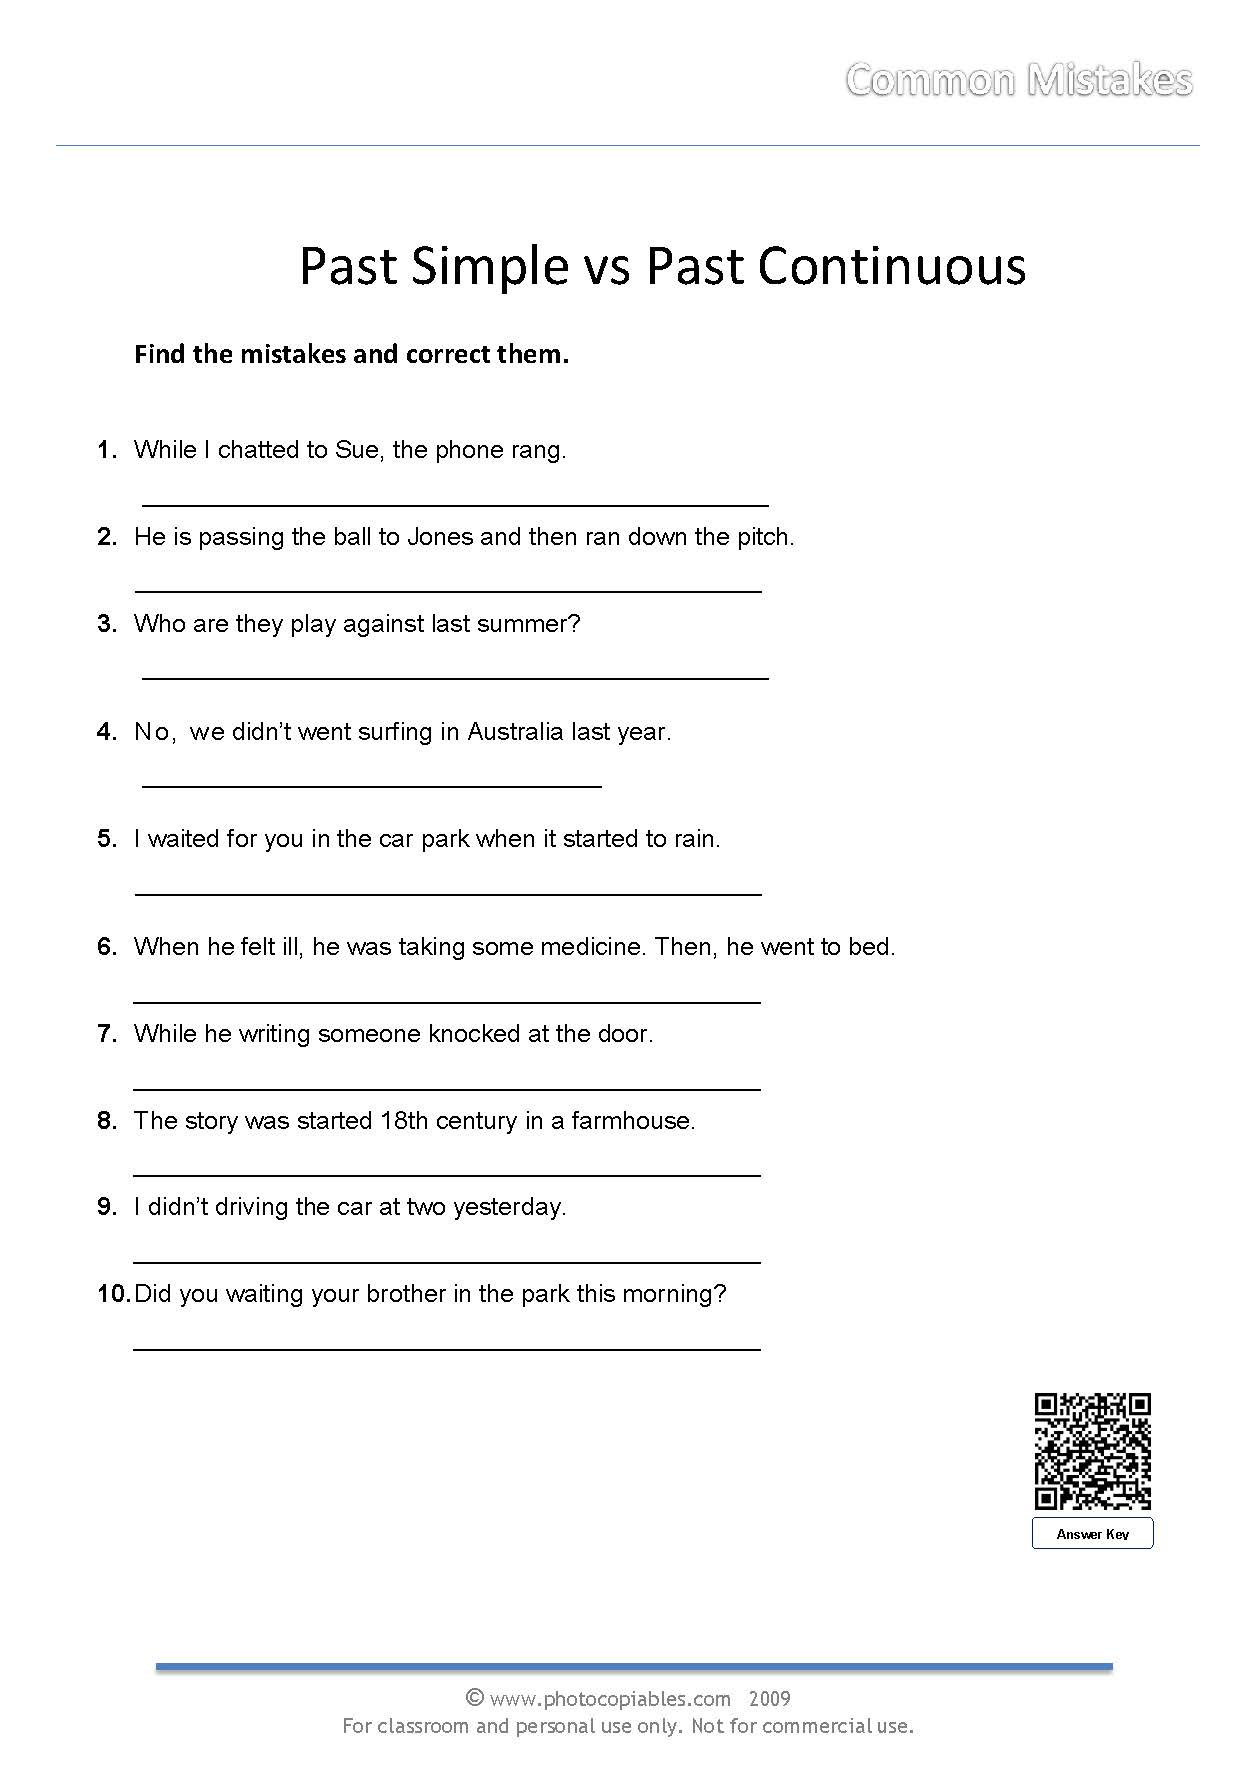 Past and continuous simple past Past Simple